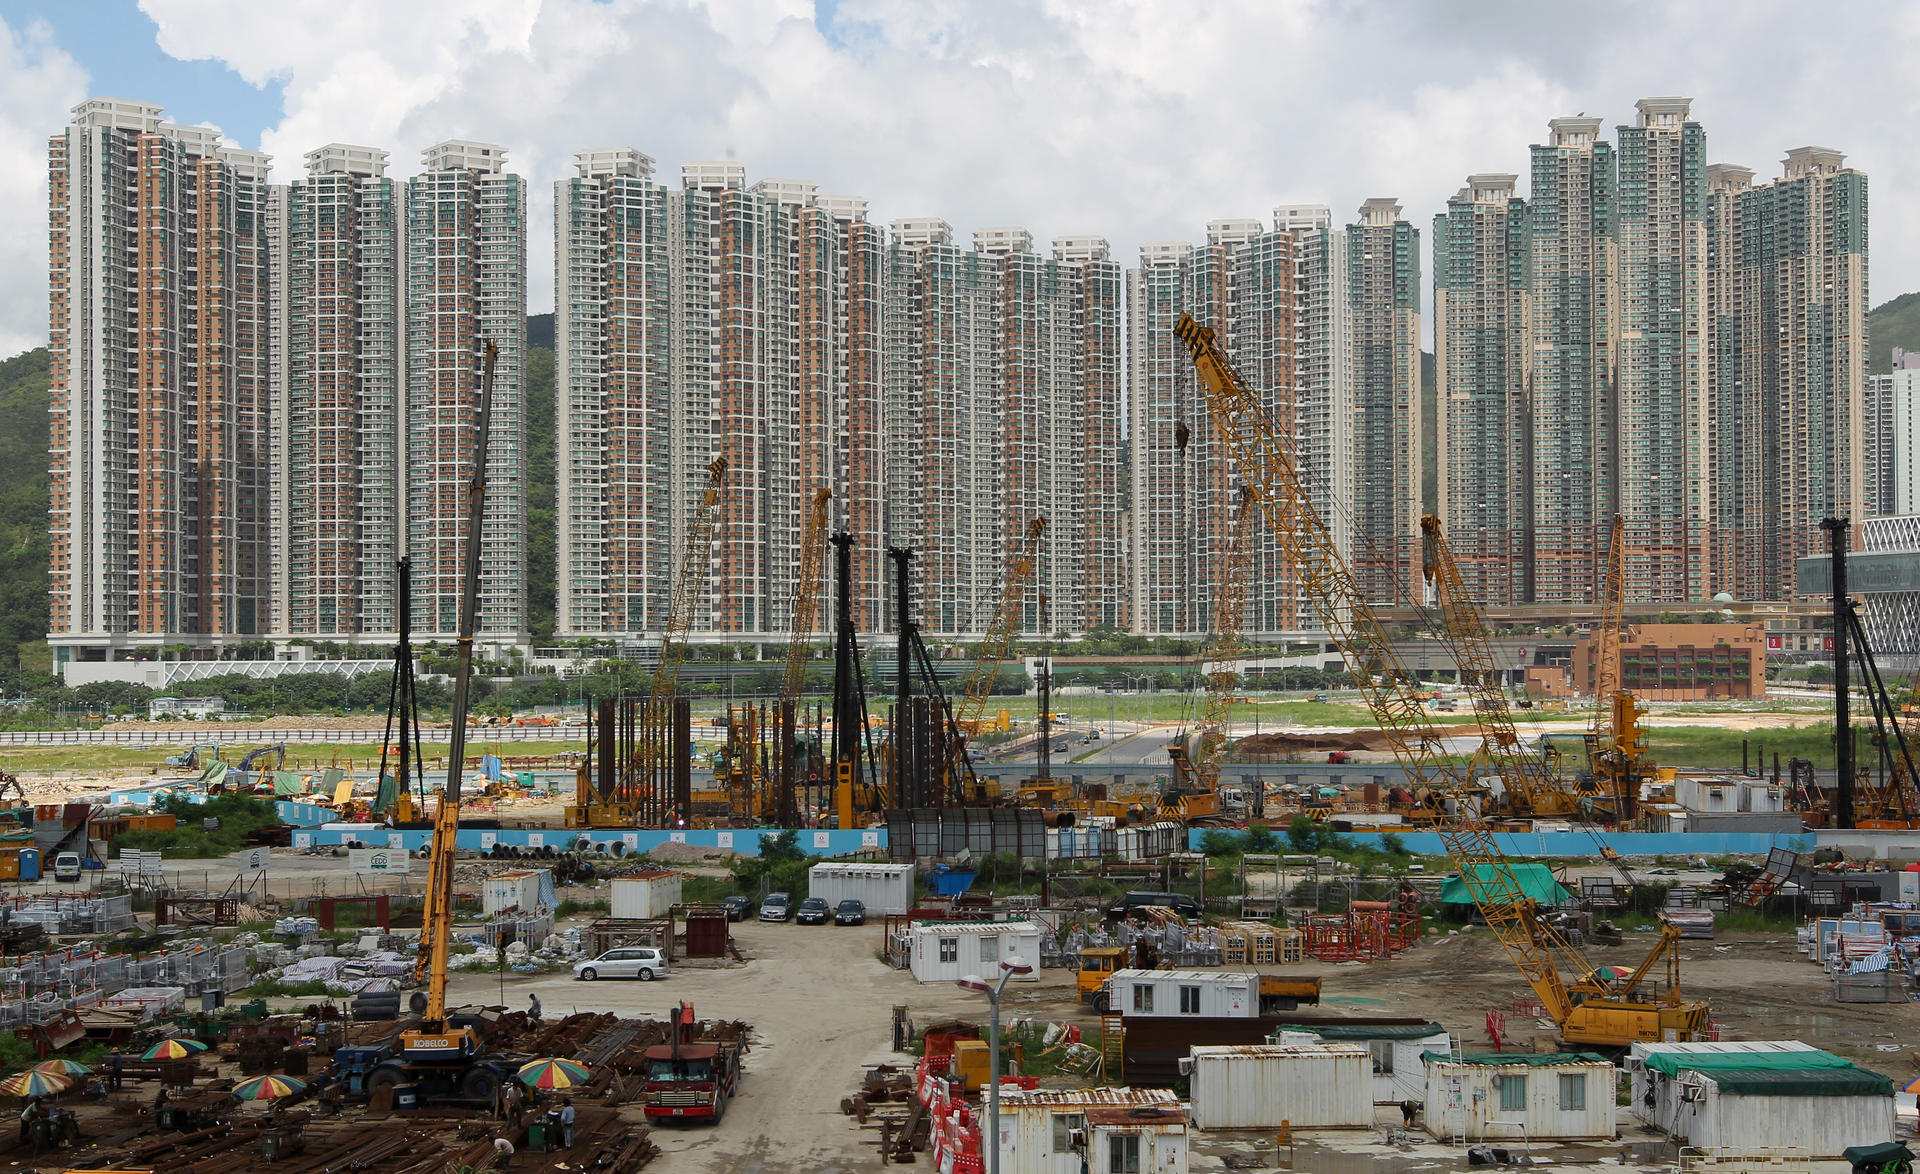 New towns like Tseung Kwan O have housed millions. Photo: Nora Tam